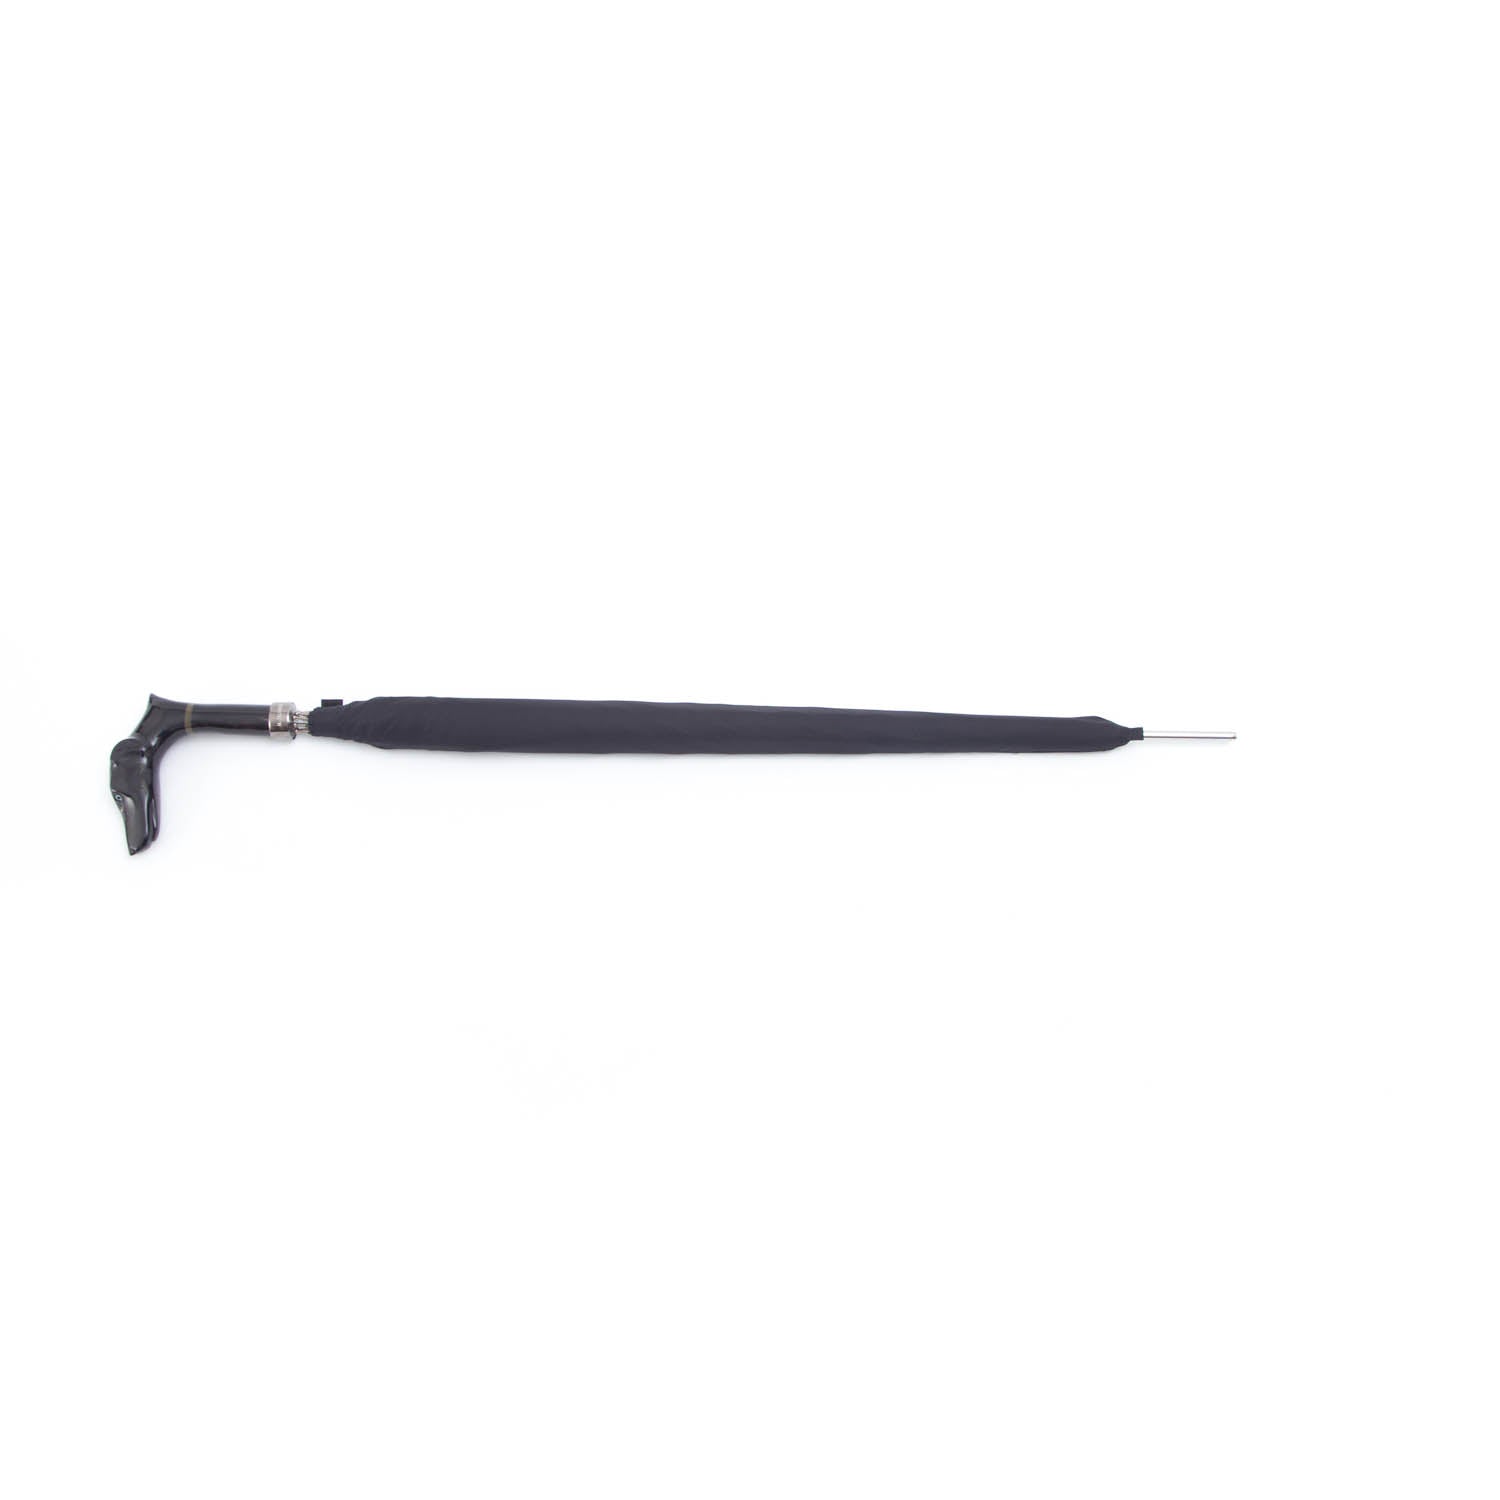 A Mario Talarico Black Canopy Umbrella with Dog Horn Handle on a white background, available at KirbyAllison.com.